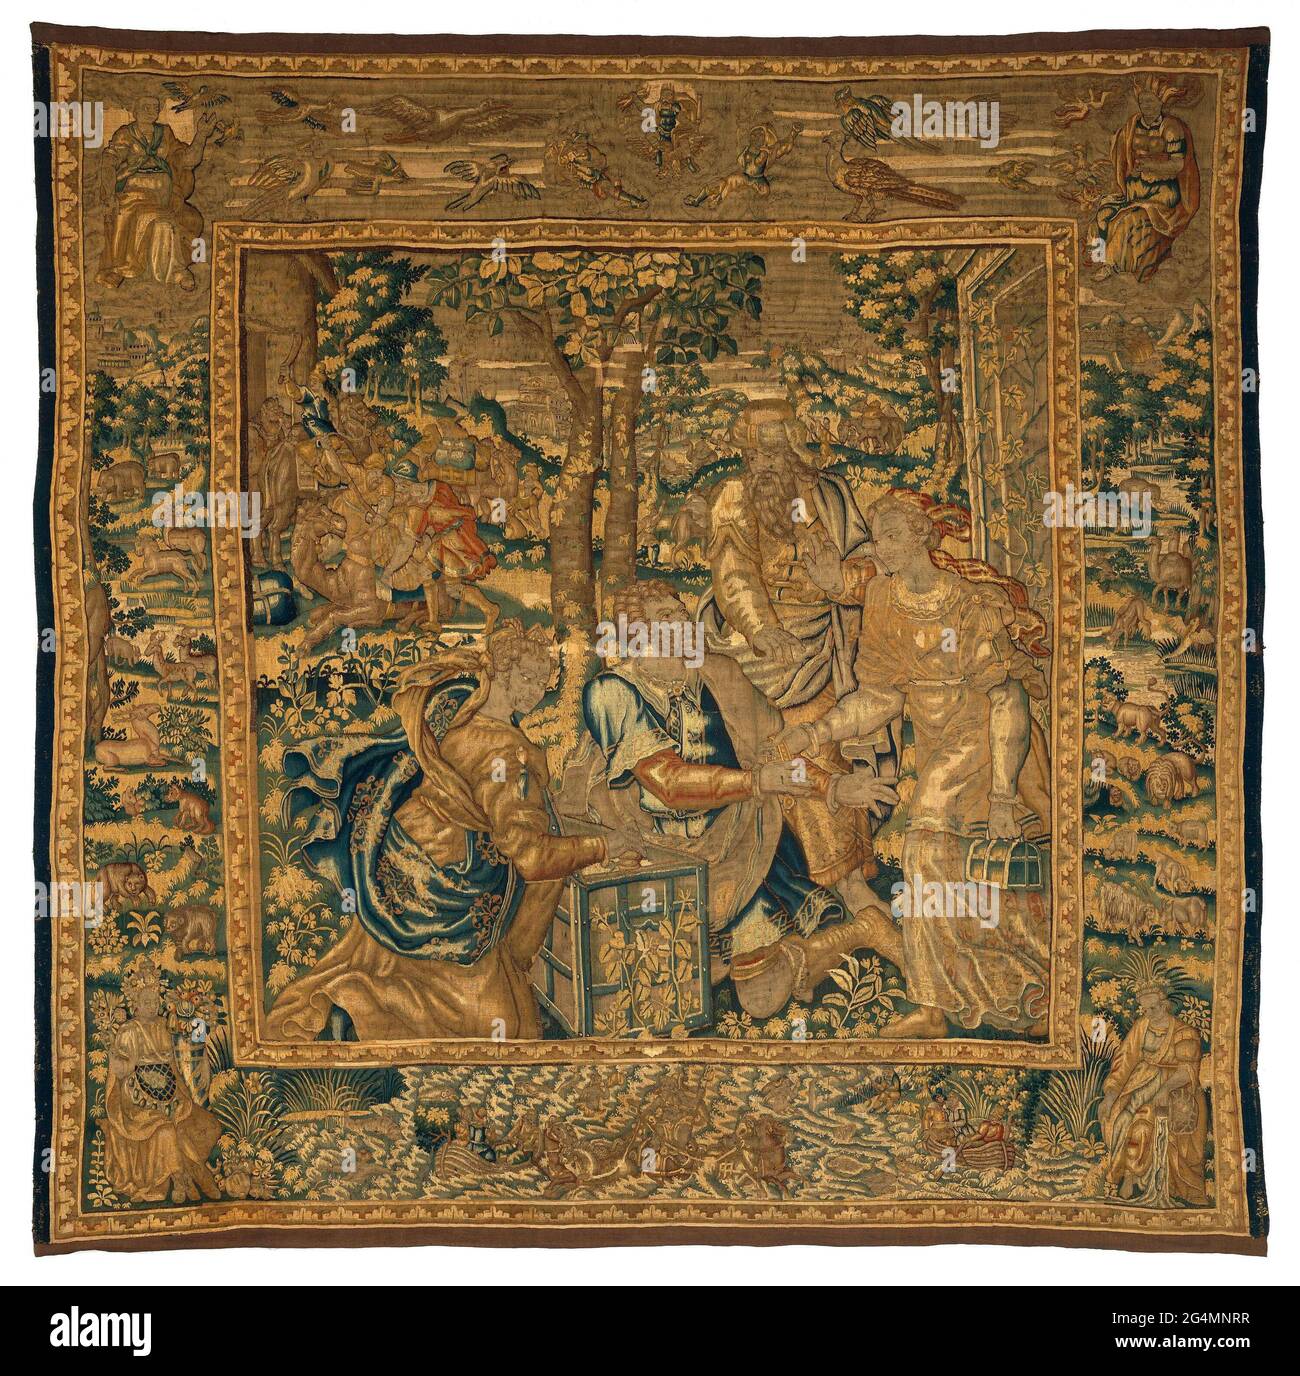 . Tapestry with eliezer and Rebecca's mother who asks Rebecca to follow Eliezer (Gen. 24:58), from a series of tapestries with the history of Rebecca and eliezer (Gen.24) with edges with animals and in the corners the four elements; With the weaver brand of Willem de Kempeneere. Stock Photo